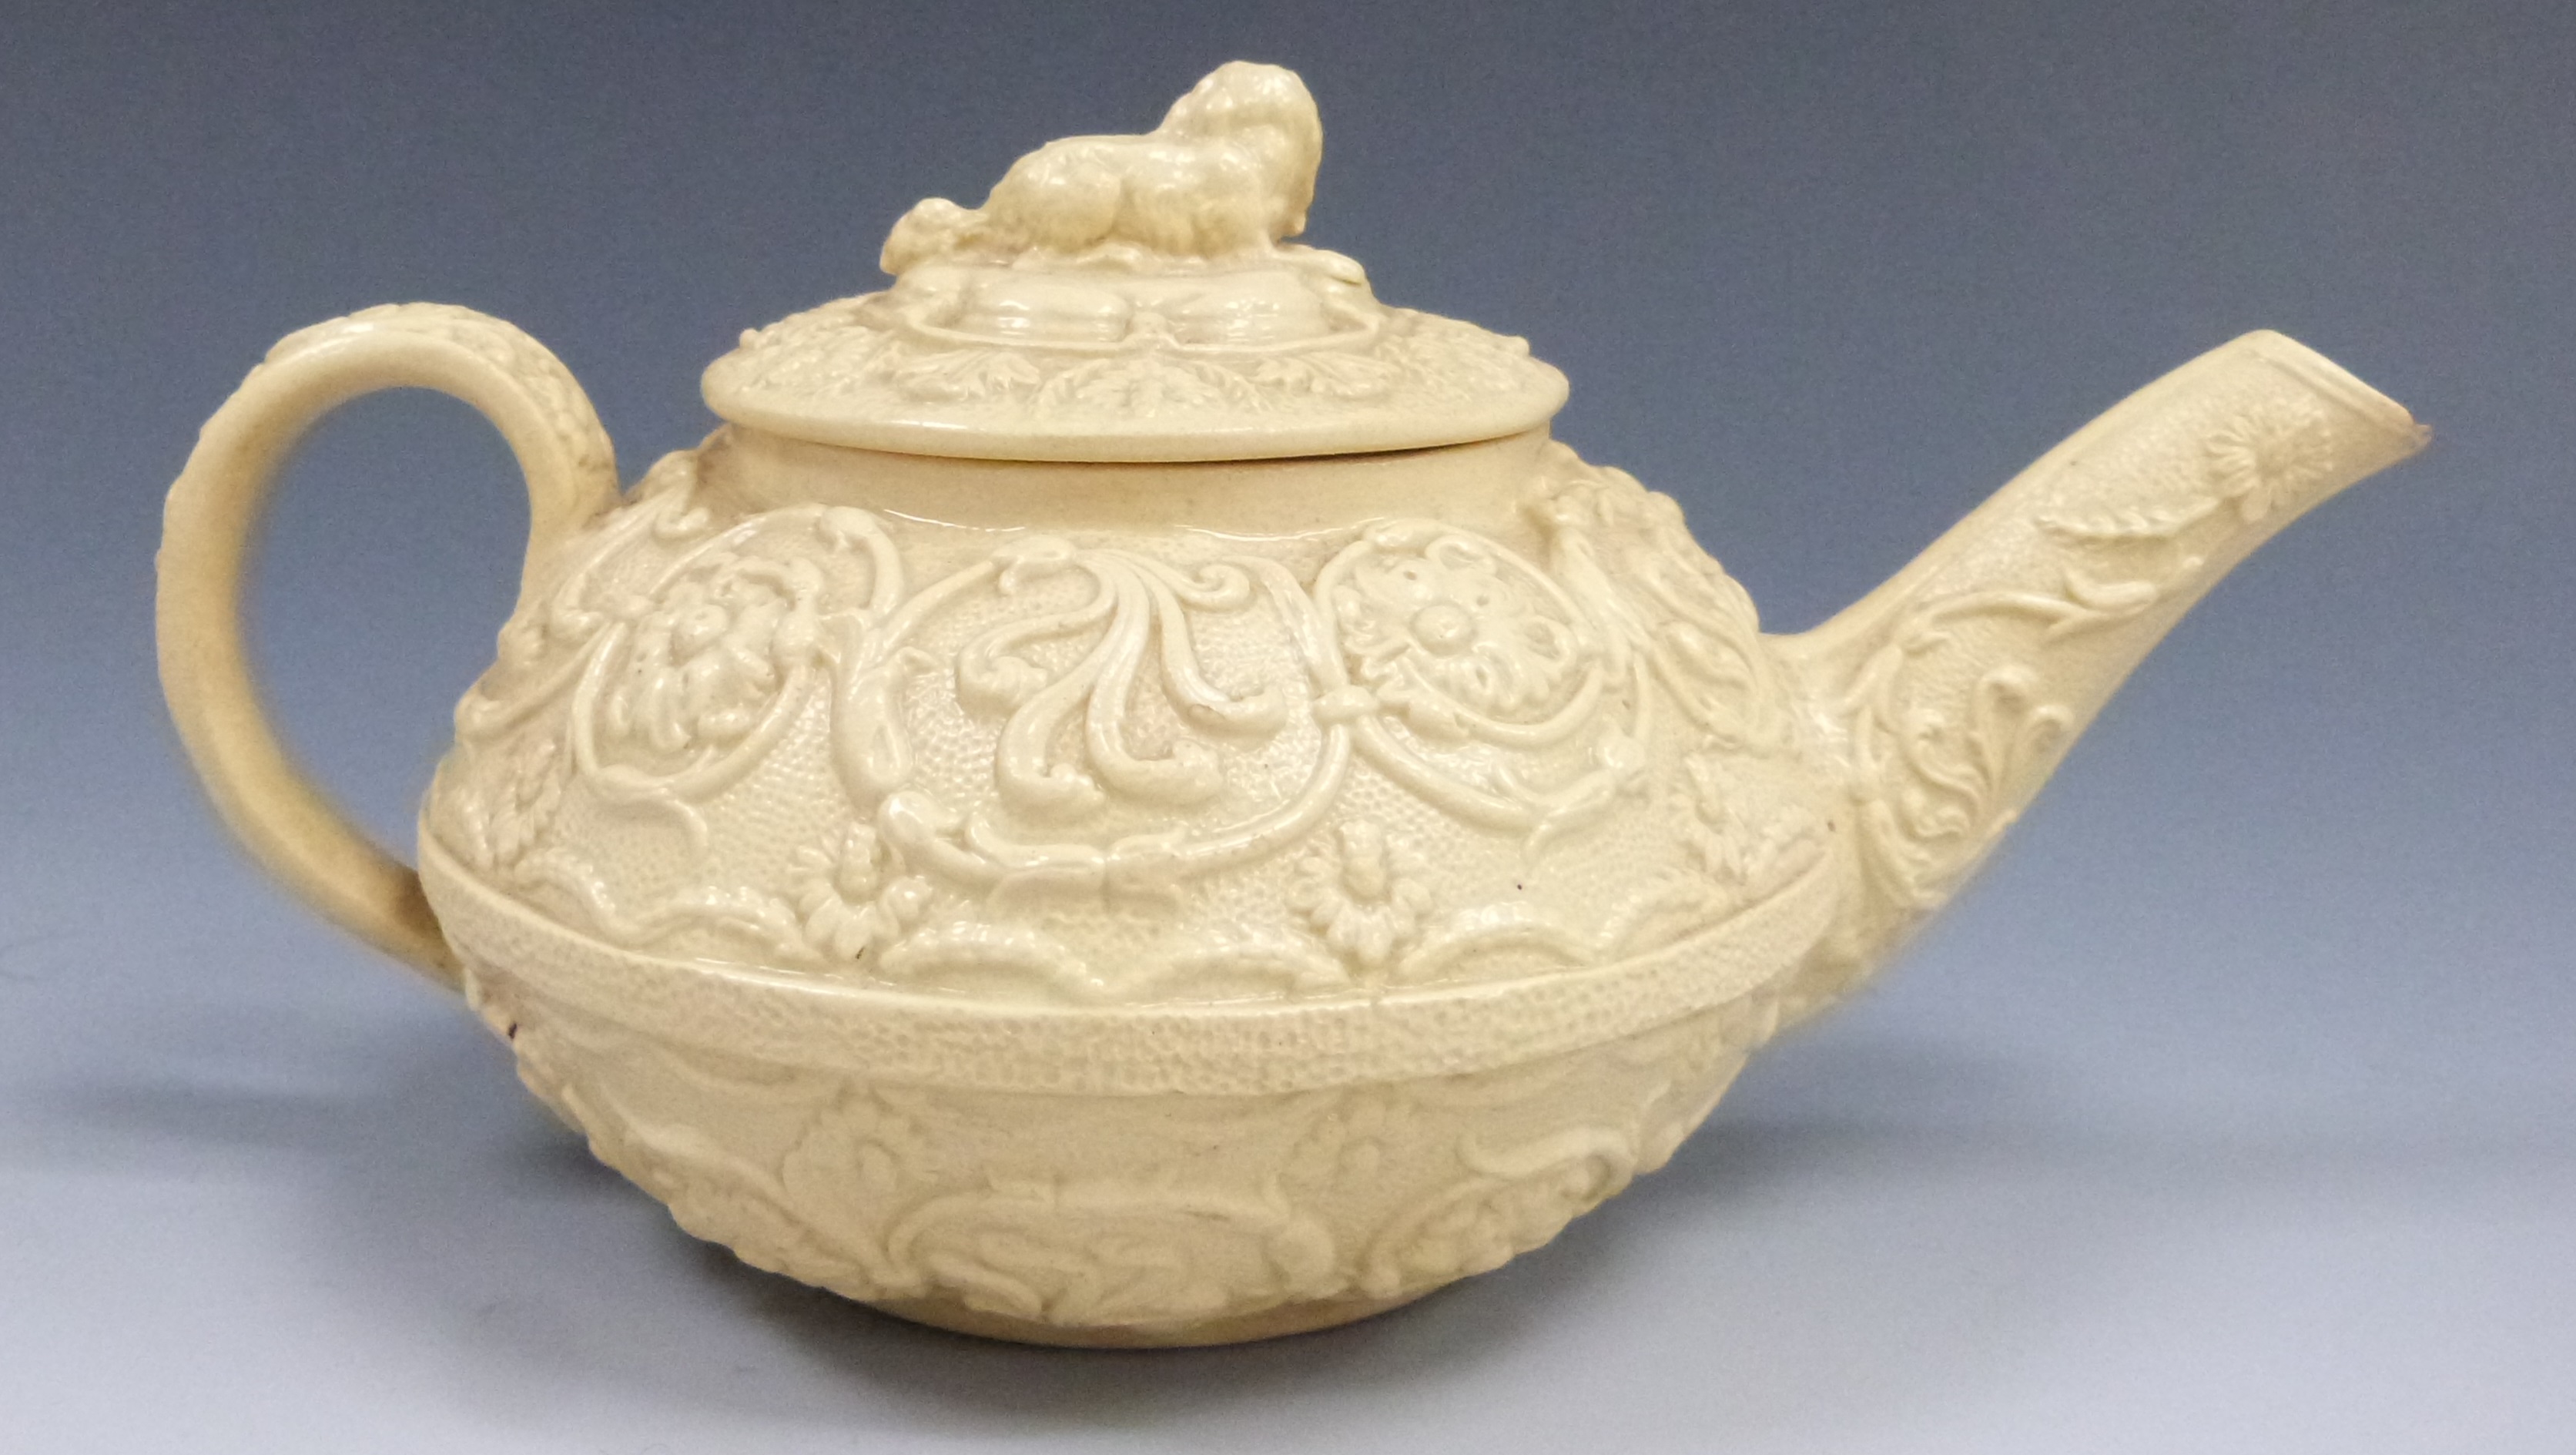 Wedgwood Drabware teapot with spaniel dog finial, length 18cm - Image 2 of 3